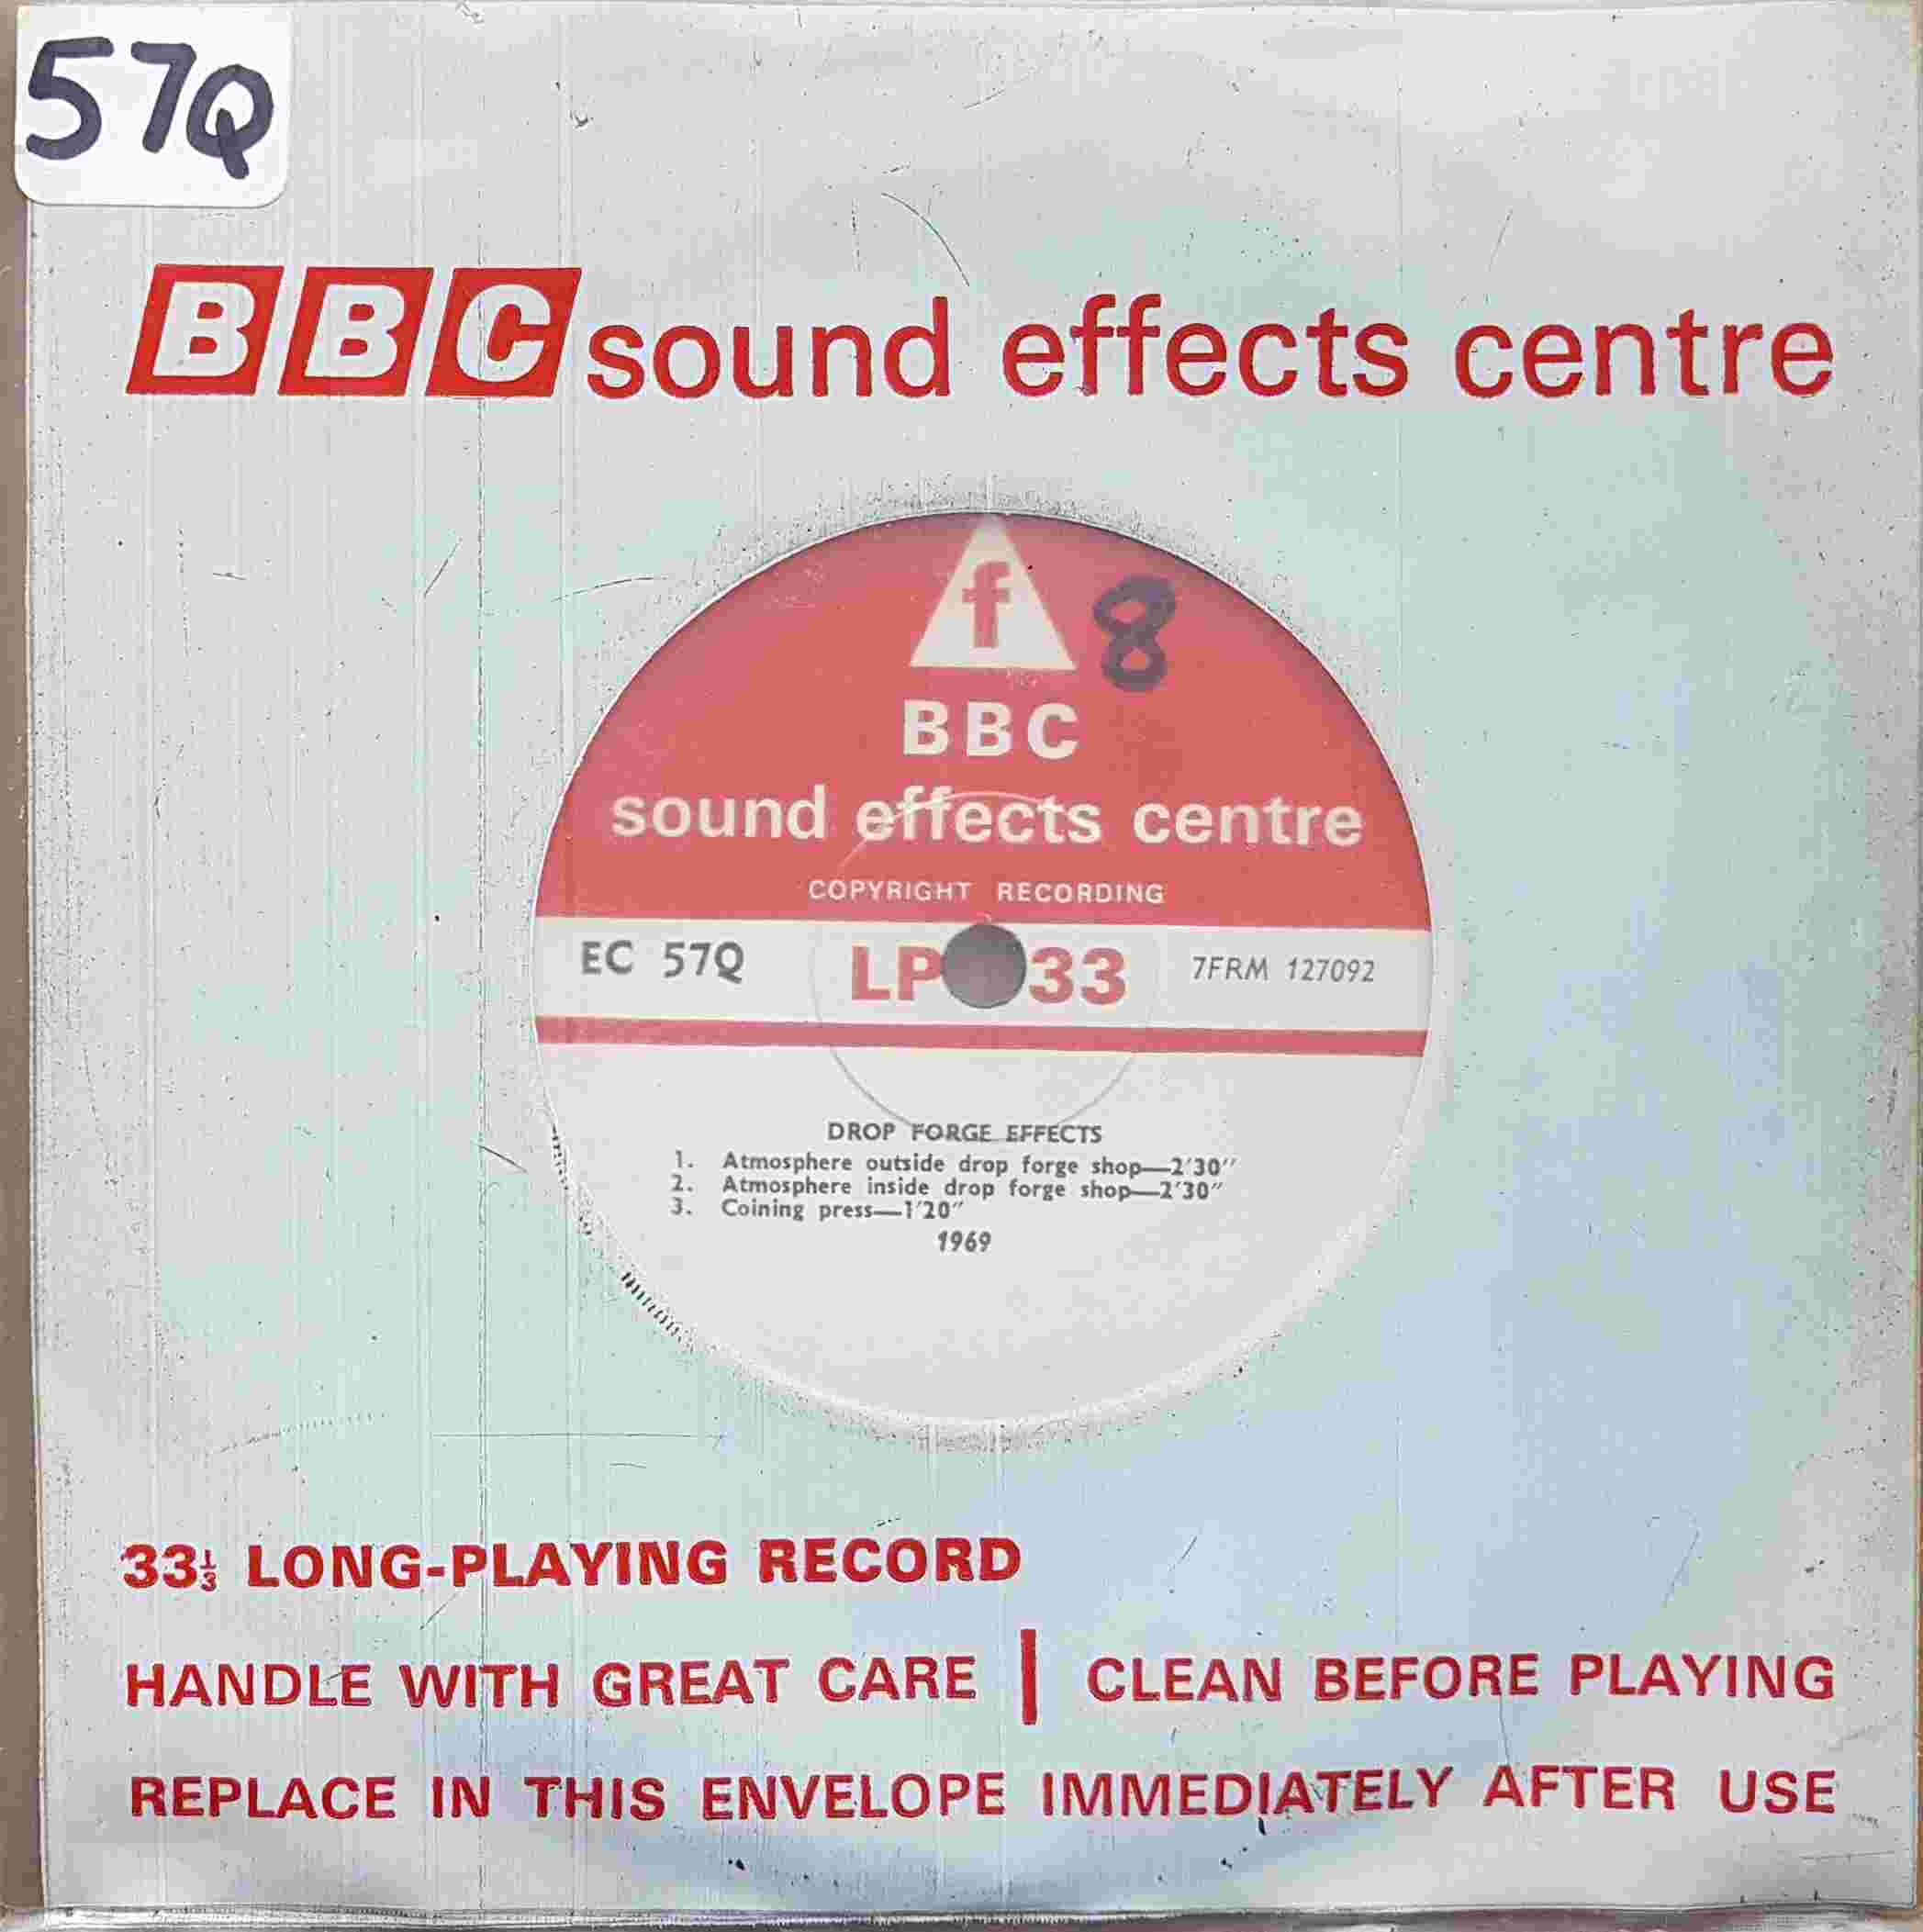 Picture of EC 57Q Drop forge effects by artist Not registered from the BBC singles - Records and Tapes library